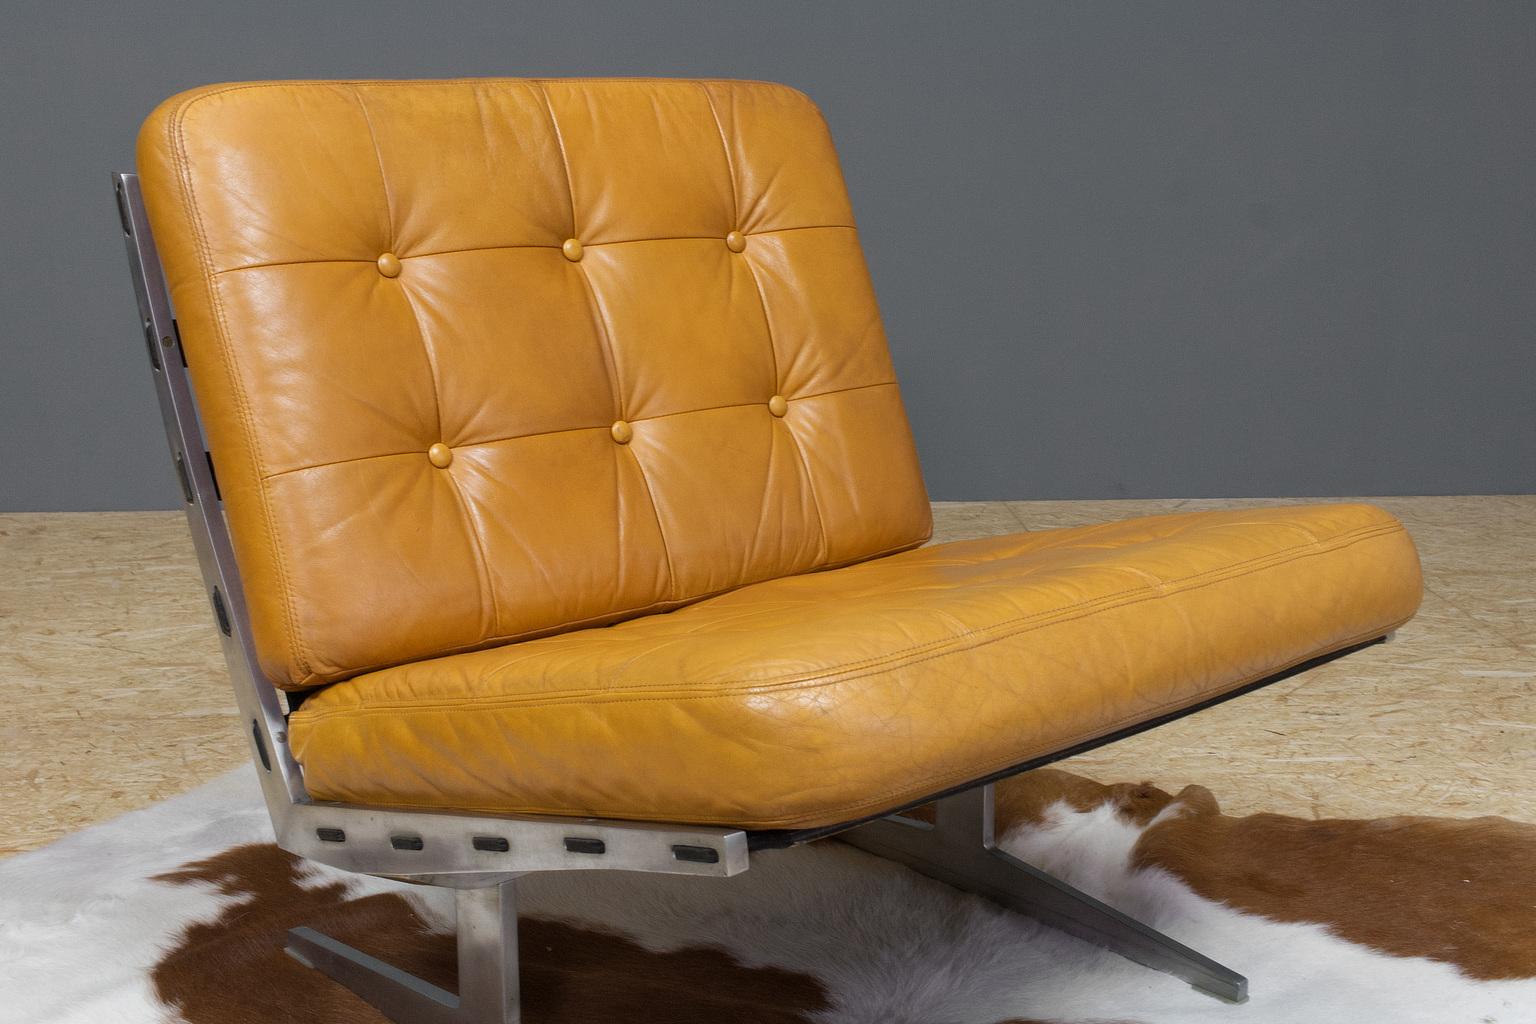 Metal Vintage Brown Leather Lounge Chair Caravalle by Paul Leidersdorff, Denmark, 1965 For Sale